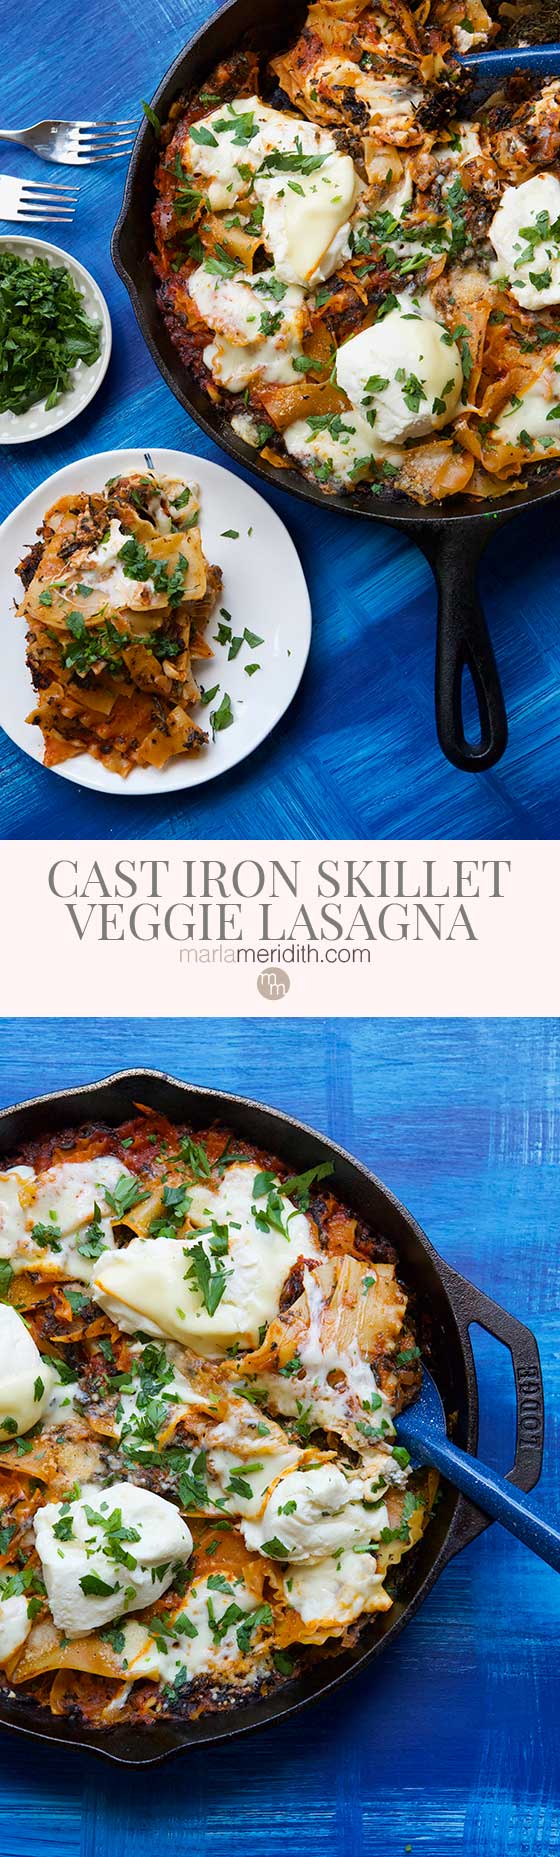 Enjoy this rustic and delicious Simple One-Pot Cast Iron Skillet Veggie Lasagna recipe as soon as you can. A hearty, healthy dinner option for busy families looking for weeknight meal solutions. MarlaMeridith.com